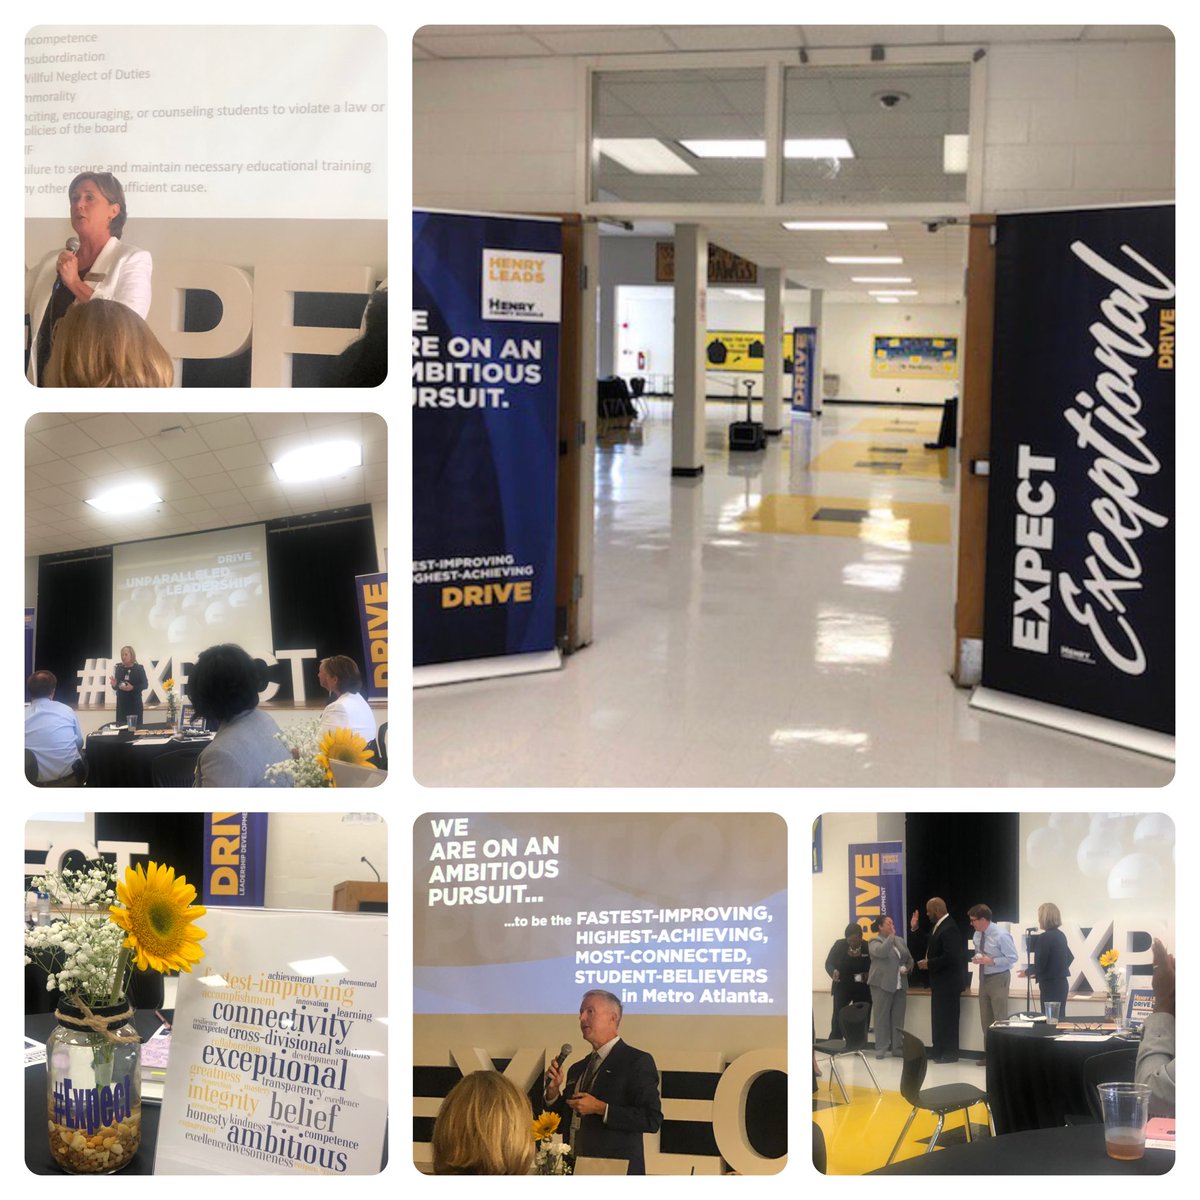 A day of #ExceptionalLearning in ⁦HCS! Excited for what’s to come as we become the fastest improving, highest achieving district in metro Atlanta known for our connectivity to & belief in students. ⁦@mlpmorse⁩ ⁦@ketruitt⁩ ⁦@KirkShrum⁩ ⁦@LearnInHenry⁩